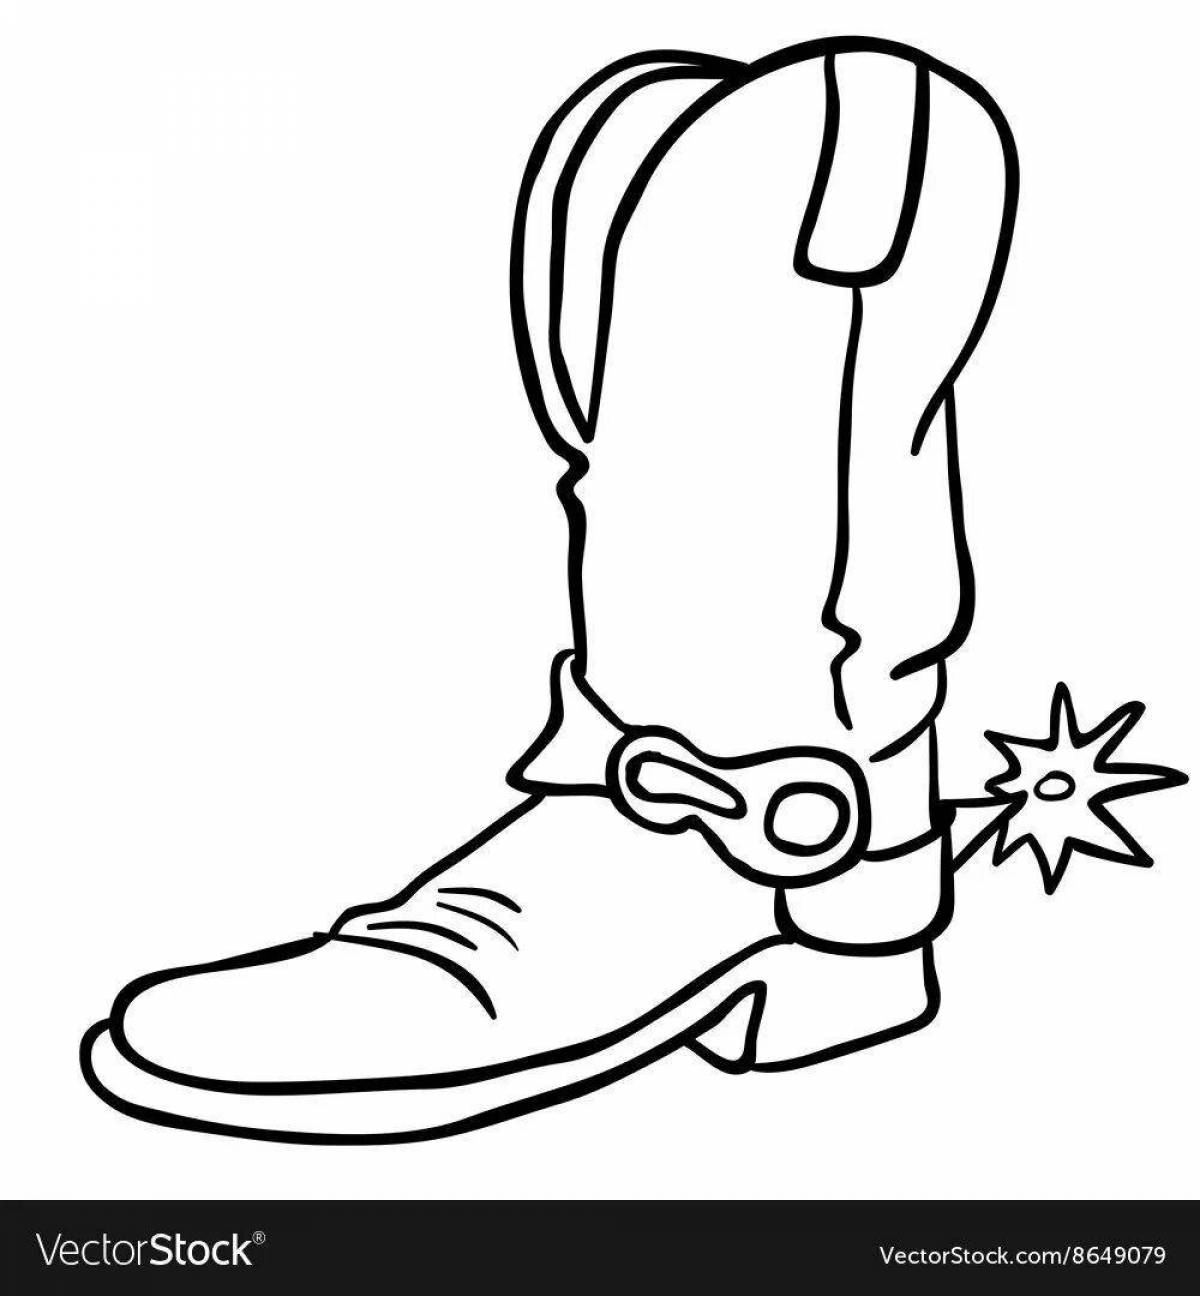 Exciting walking boots coloring page